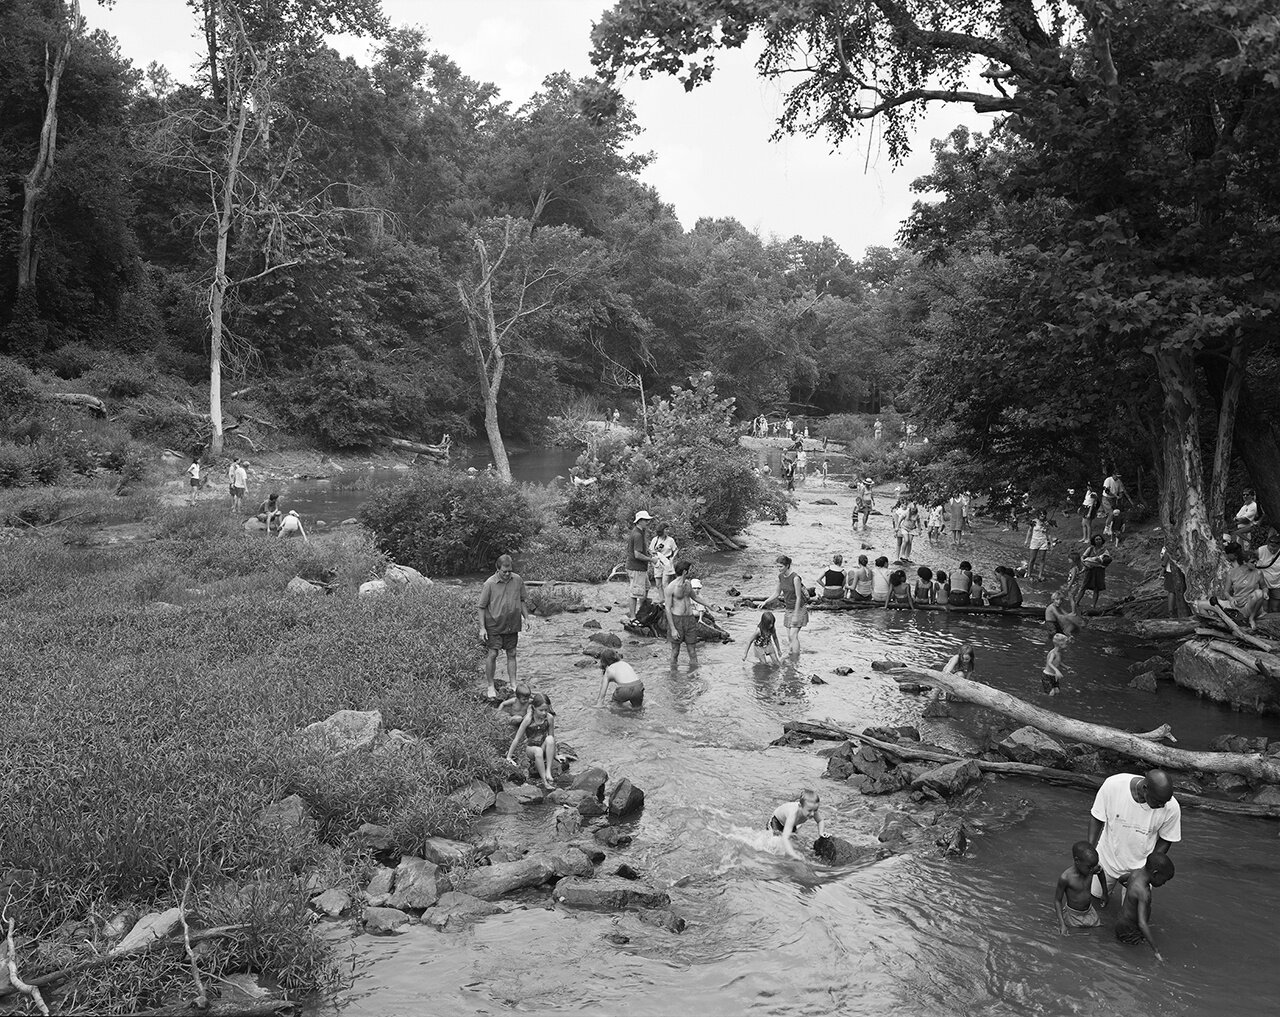   Eno River , 2004 (from  New Wilderness  series)  Edition: 5/5 Selenium-toned silver gelatin print, mounted to aluminum 28 x 35 in. (image size) The Do Good Fund, Inc., 2019-022 